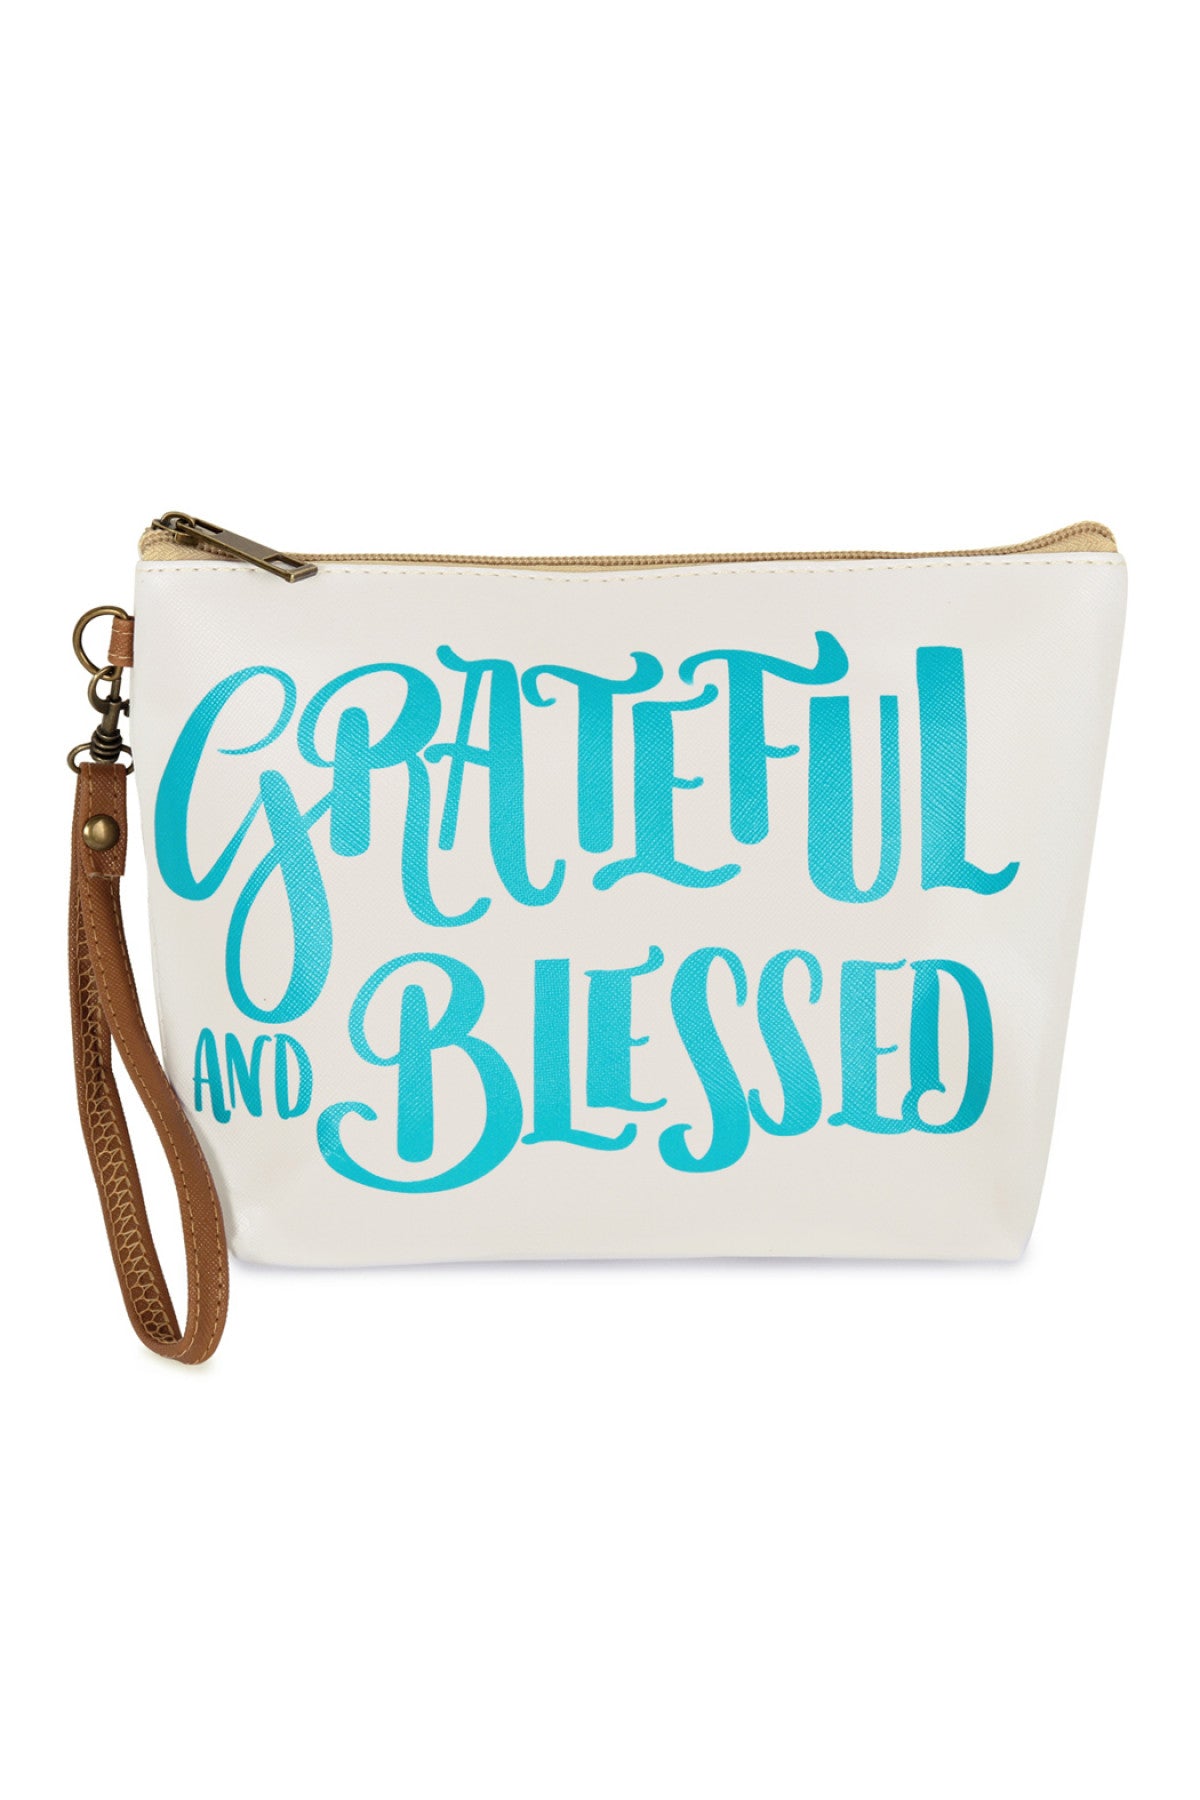 Grateful & Blessed pouch